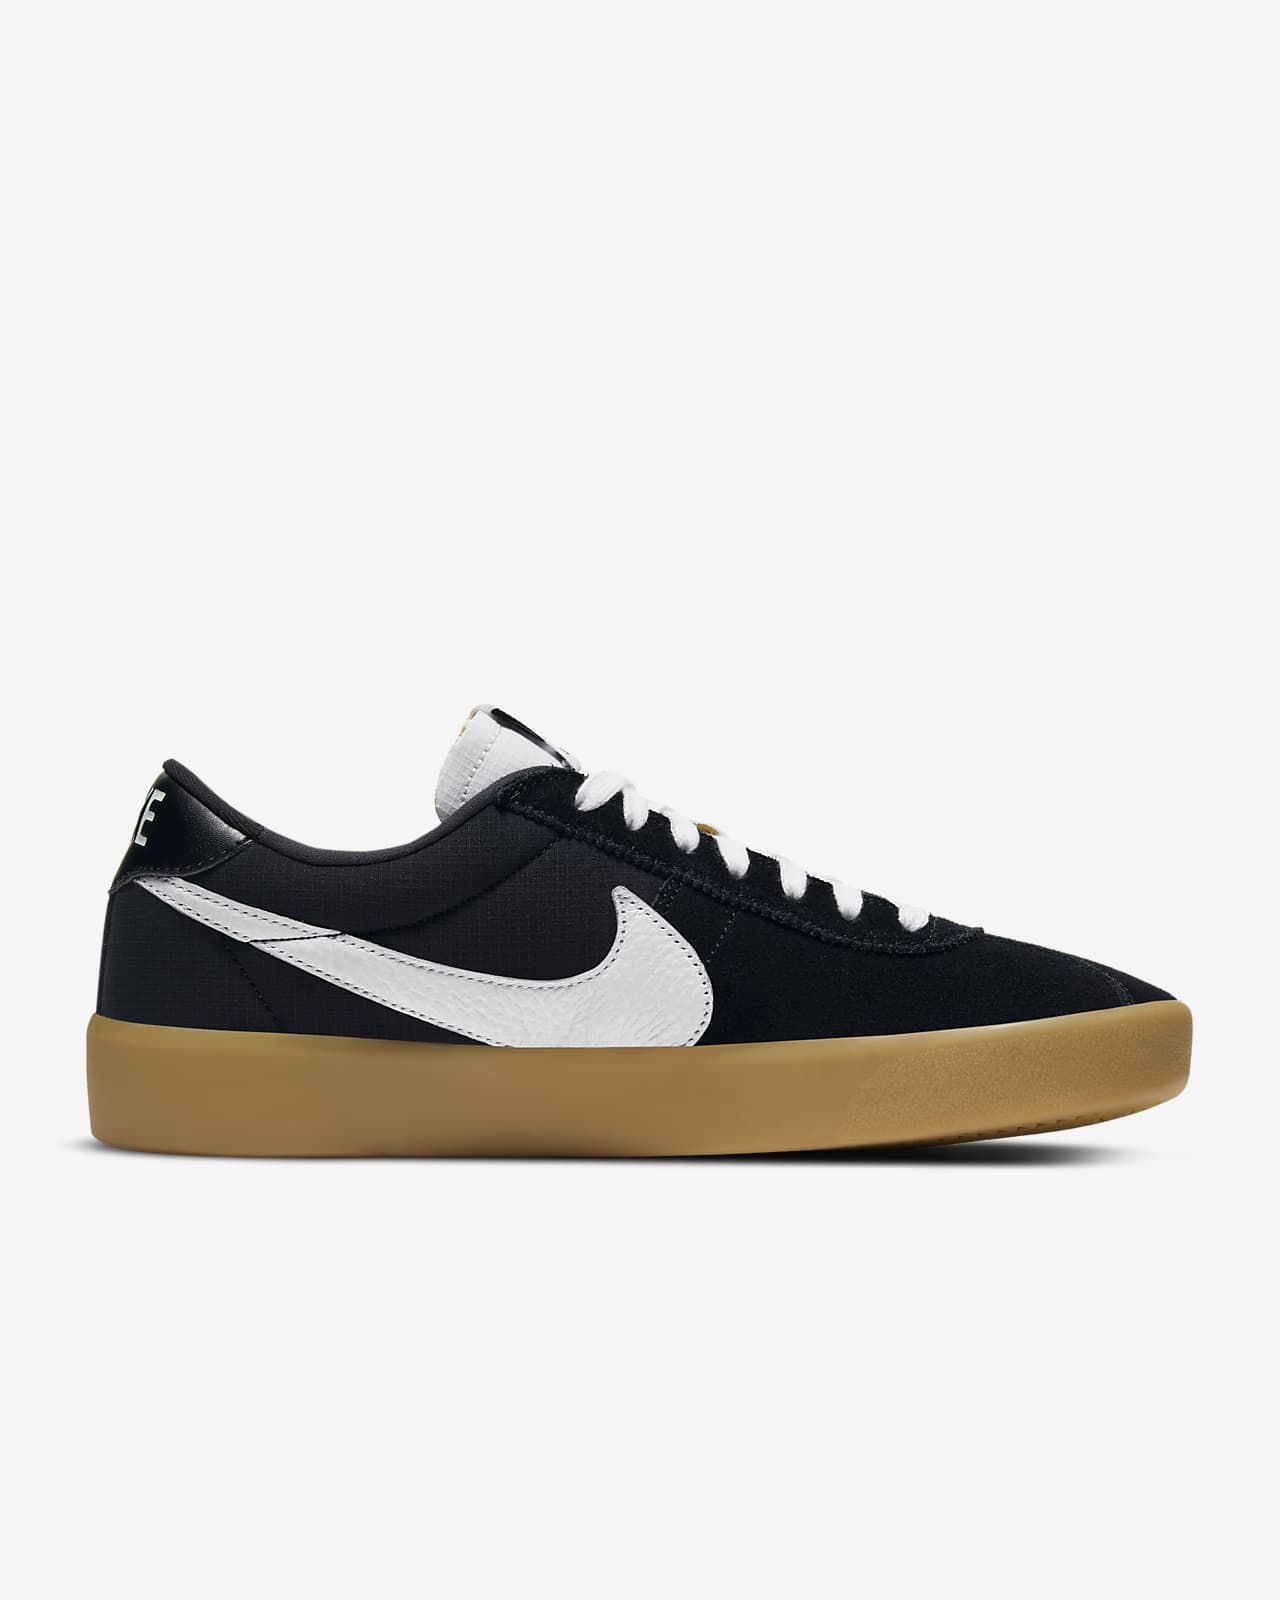 nike low skate shoes